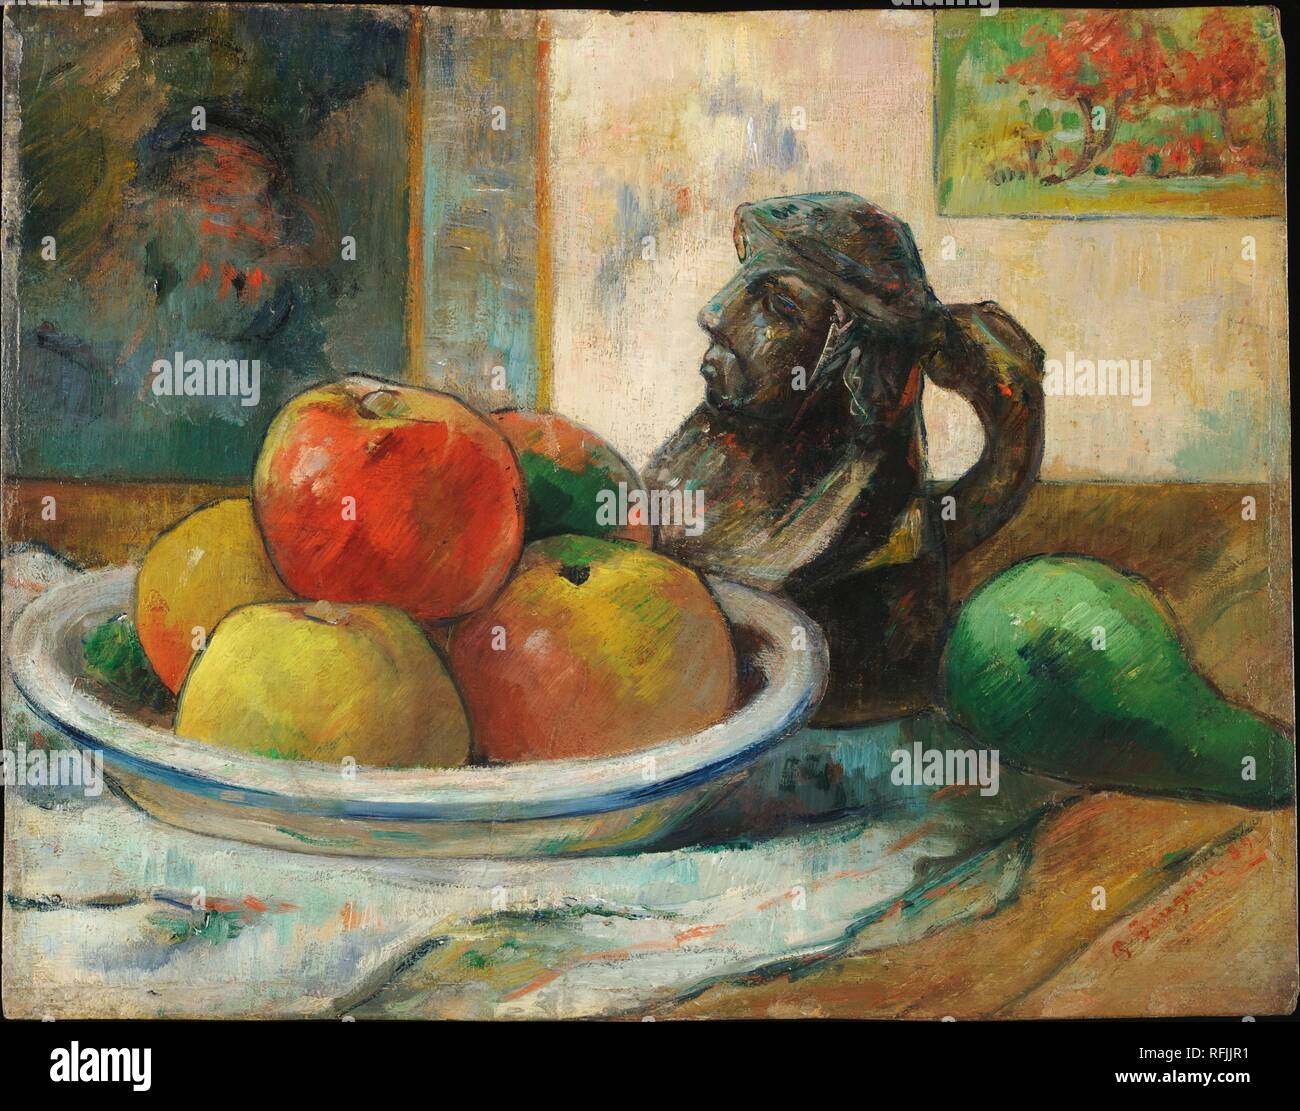 Pommes, poire et céramique / Still Life with Apples, a Pear, and a Ceramic Portrait Jug. Date/Period: 1889. Painting. Oil on canvas. Height: 28.6 cm (11.2 in); Width: 36.2 cm (14.2 in). Author: PAUL GAUGUIN. Stock Photo